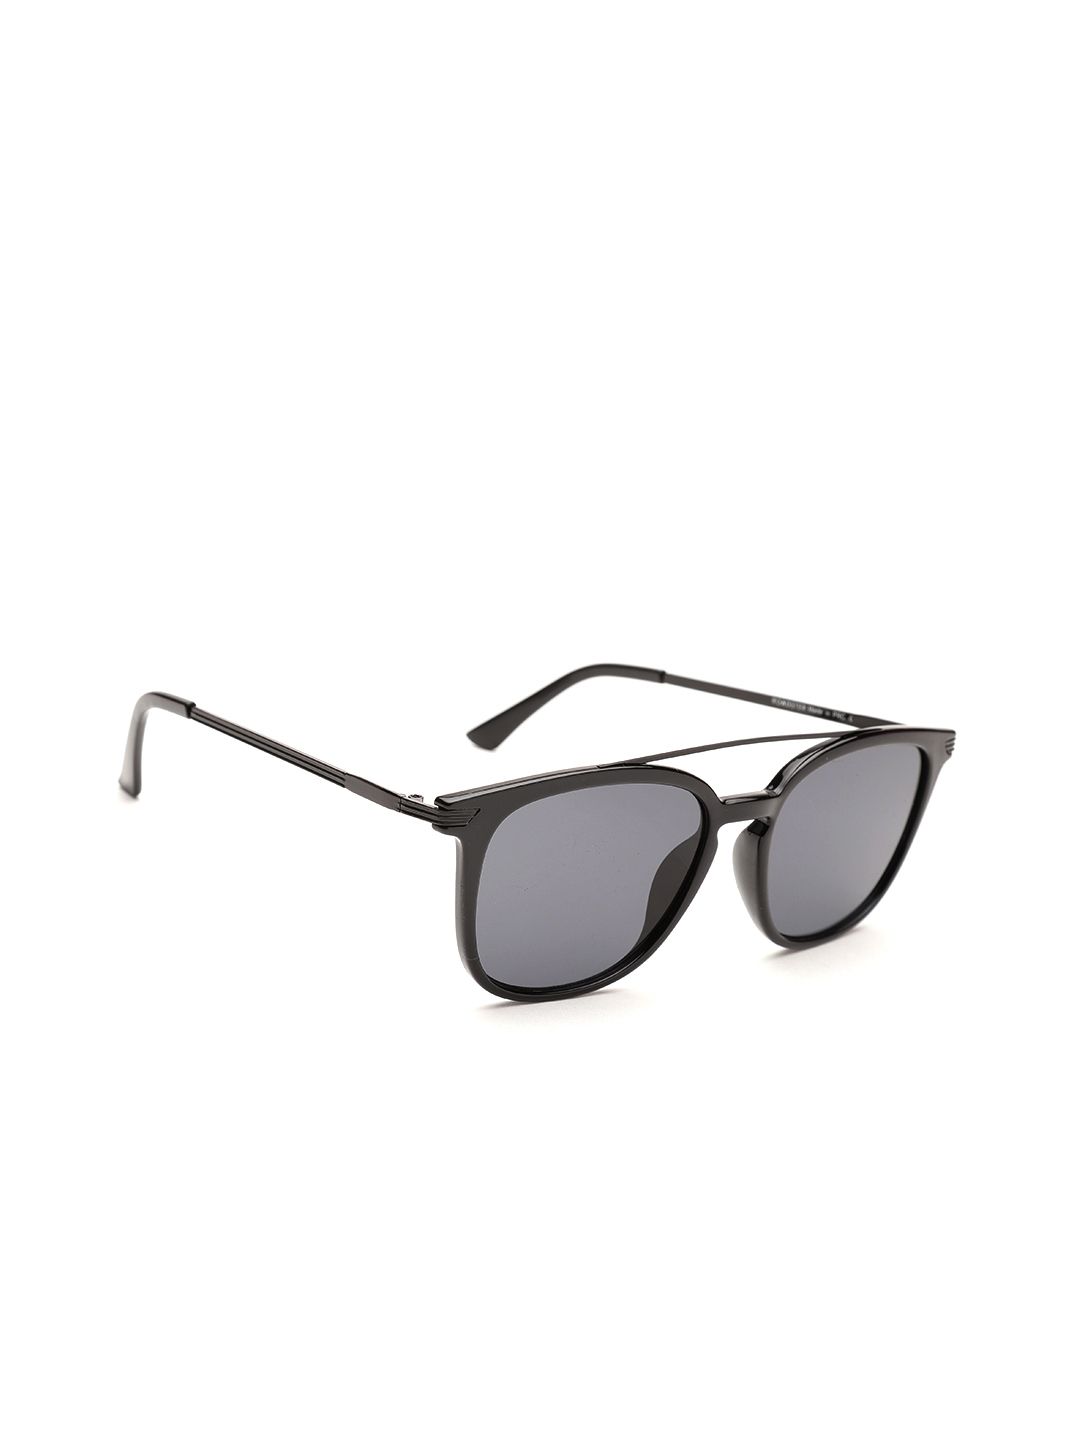 The Roadster Lifestyle Co Unisex Square Sunglasses MFB-PN-PS-A3932 Price in India